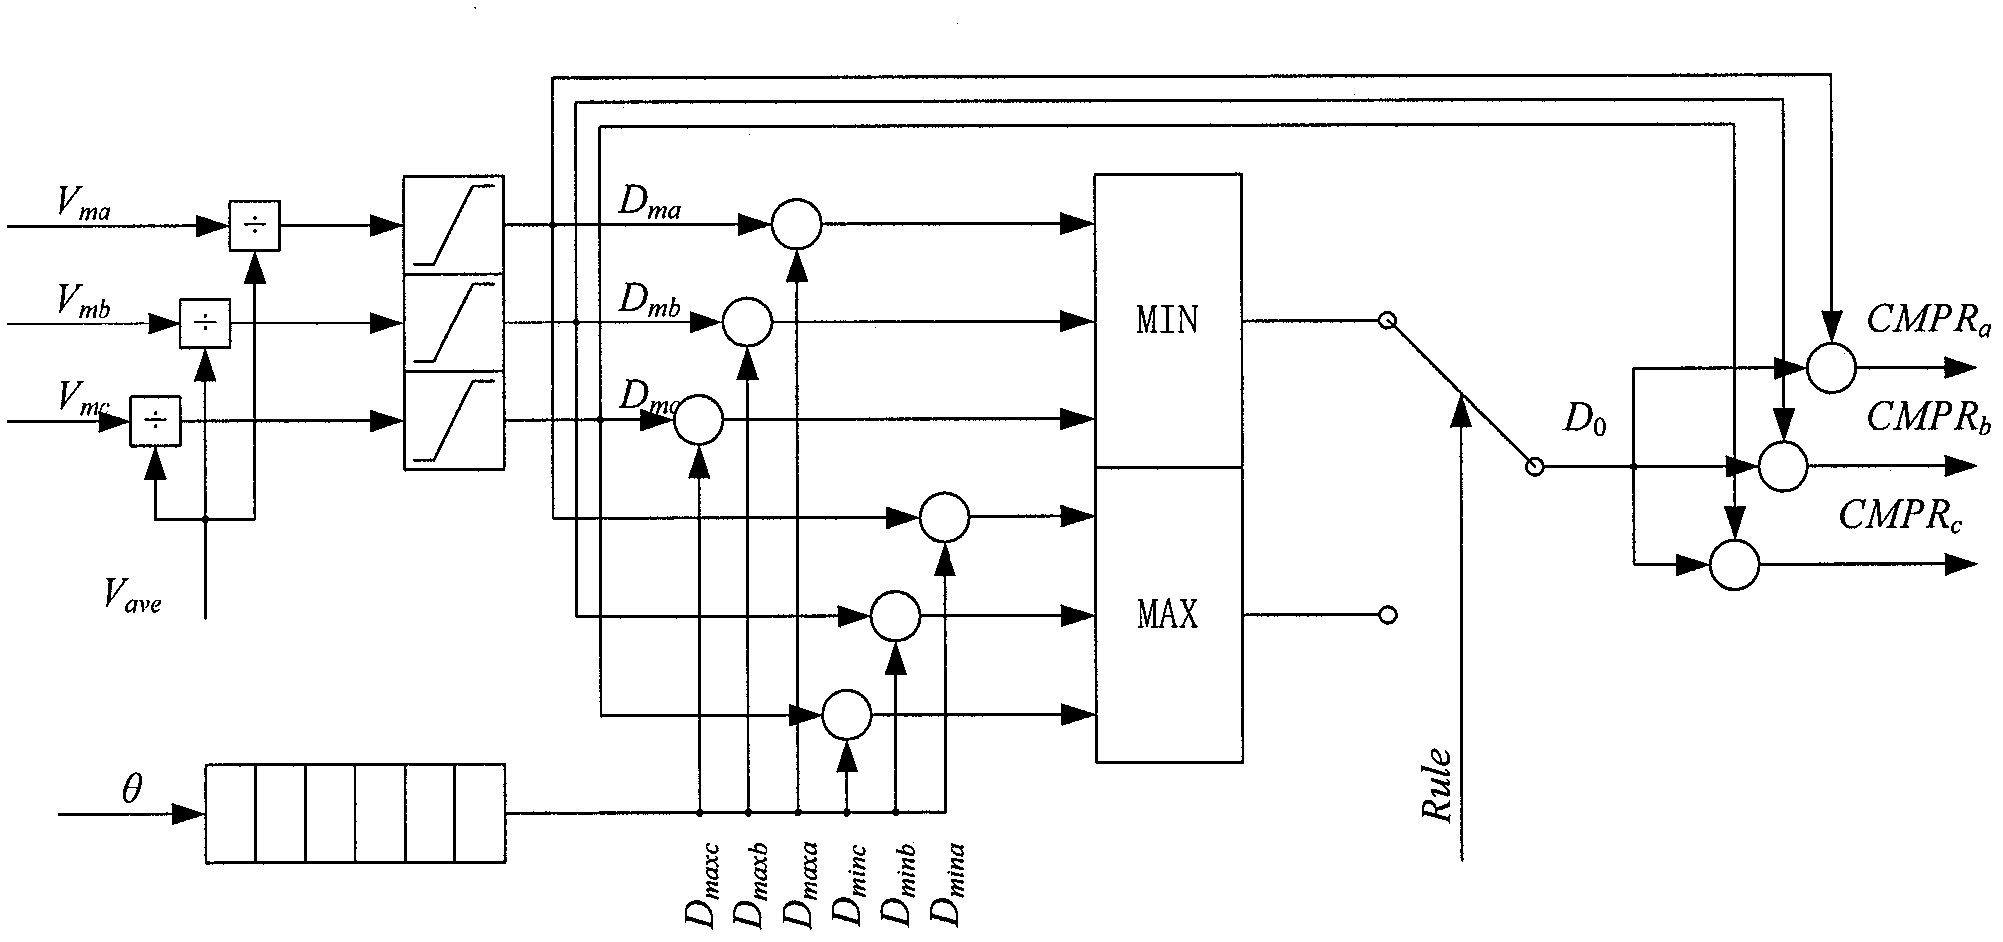 Controller used for three-phase three-wire Vienna rectifier